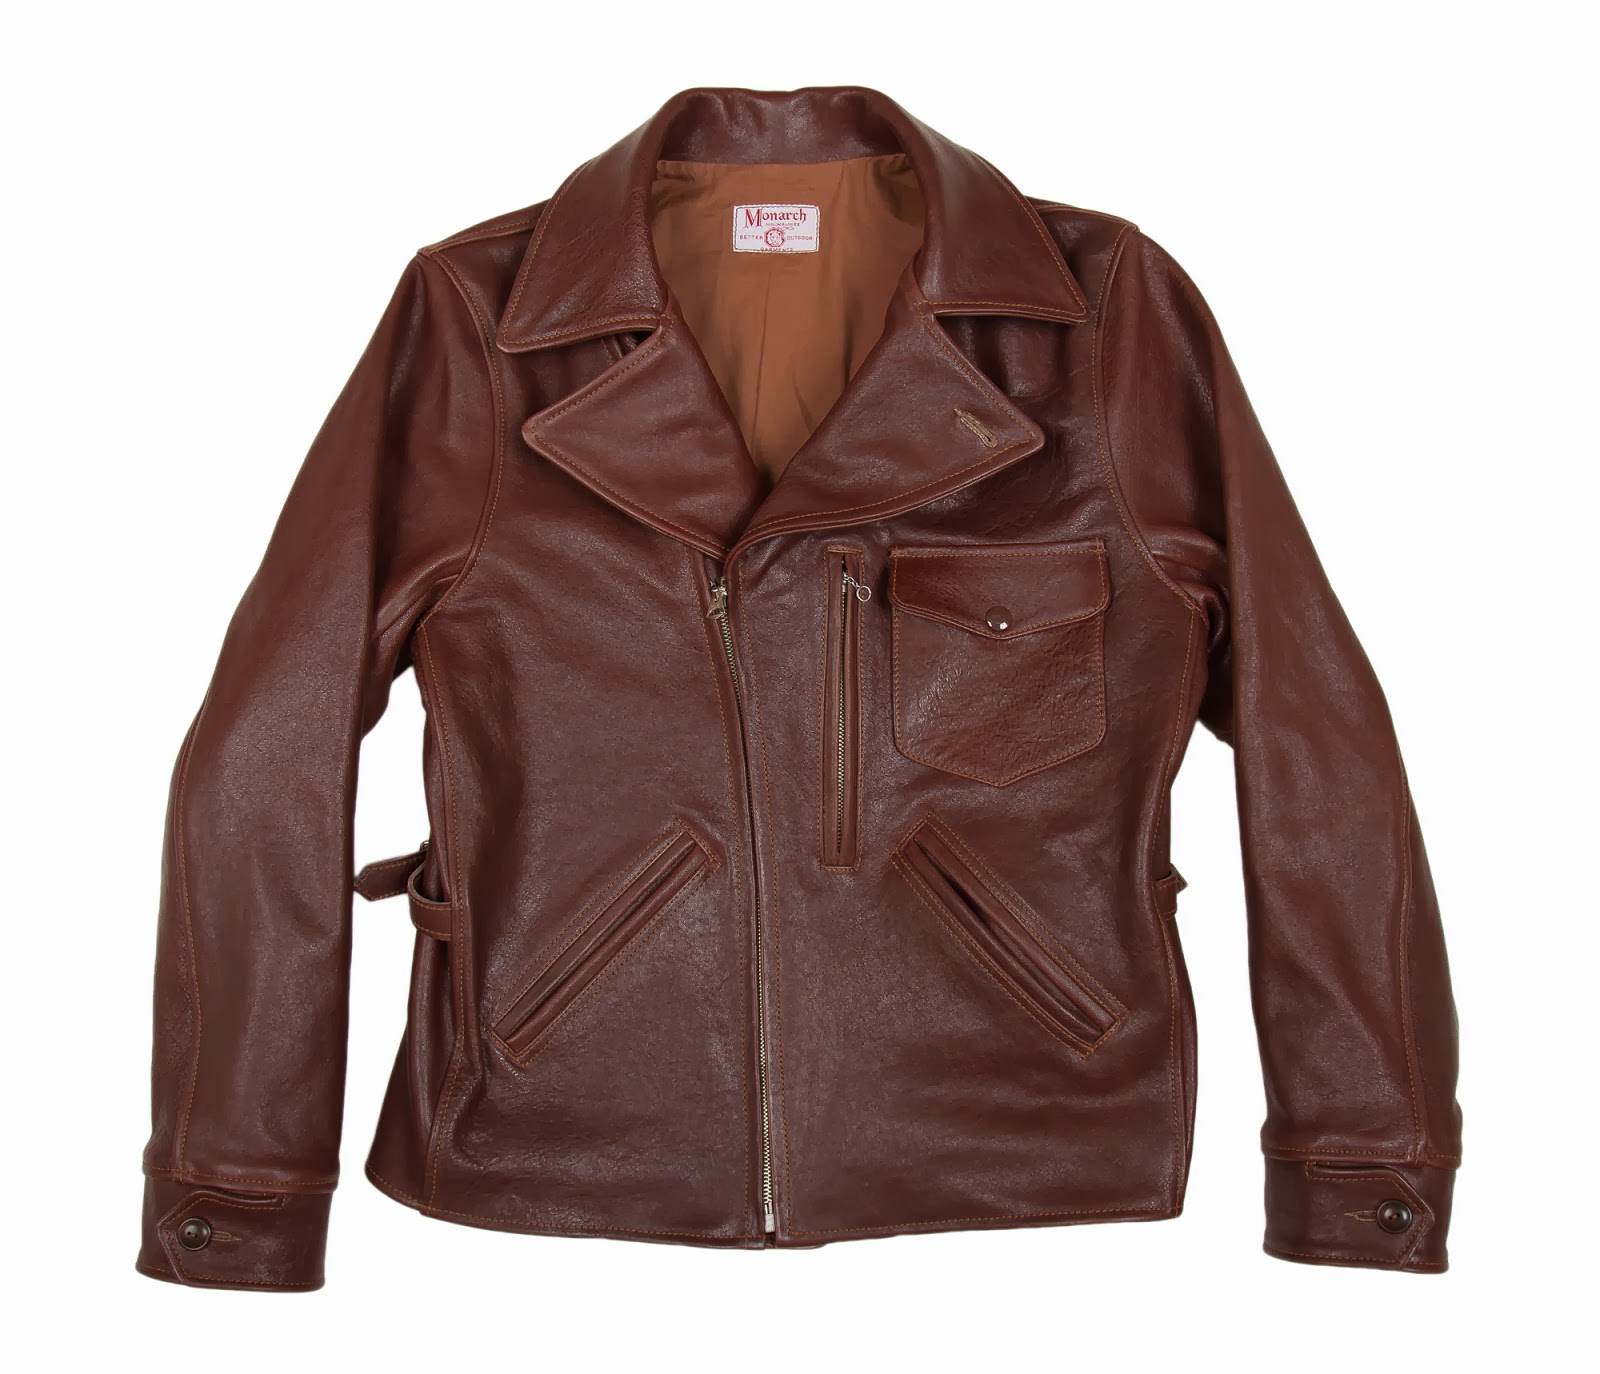 Rugged Style: BillKelso Mfg. Well made leather jacket crafted in Usa.